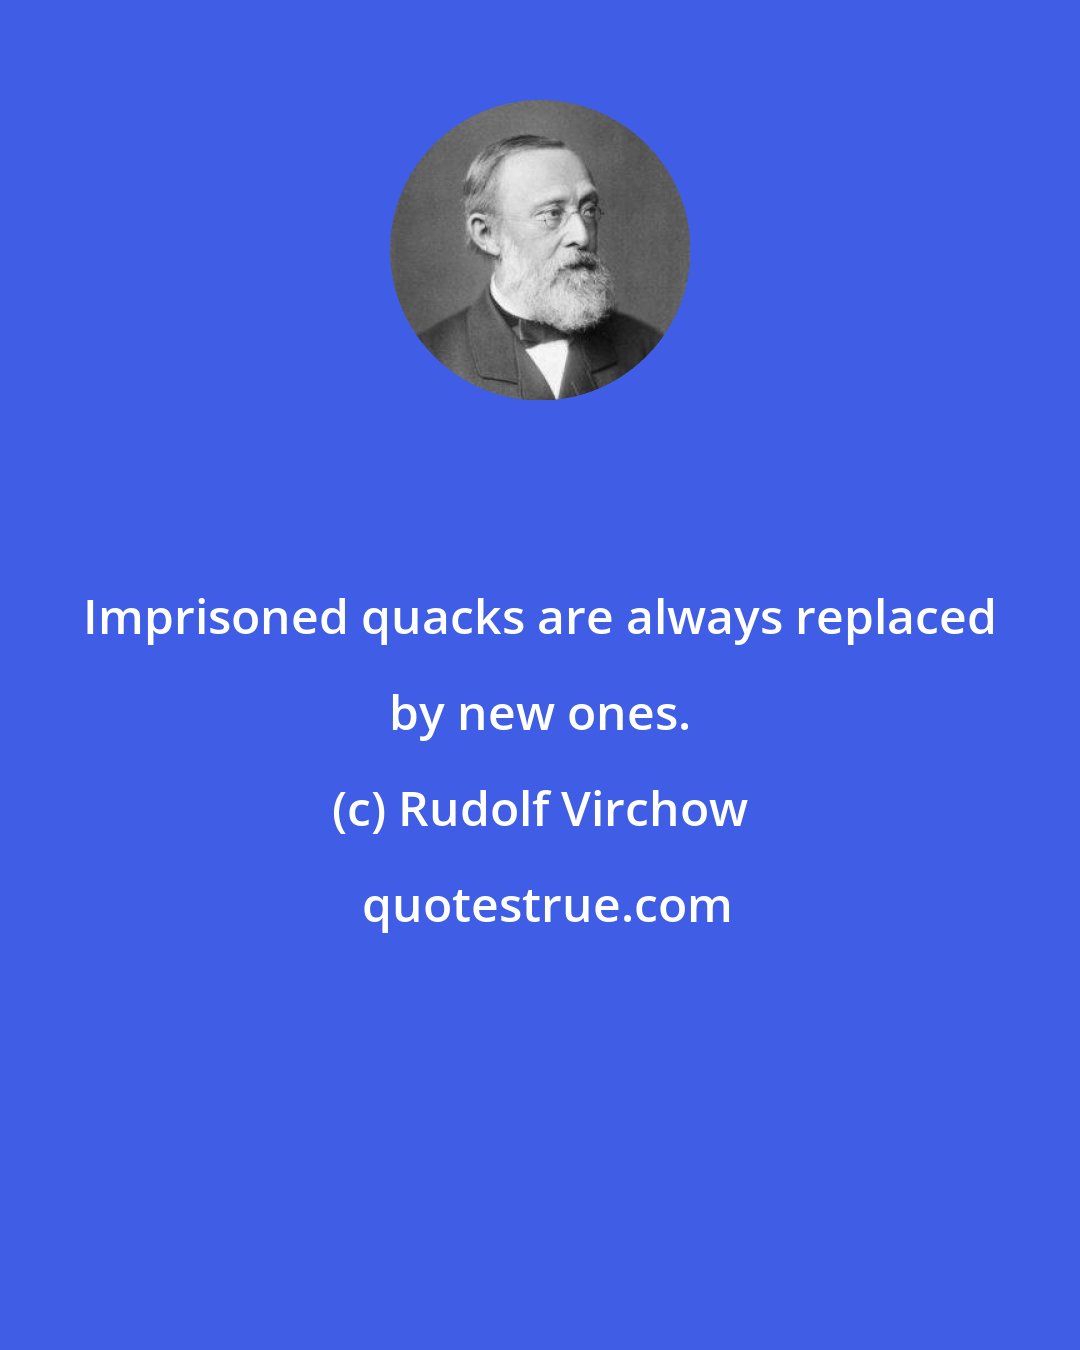 Rudolf Virchow: Imprisoned quacks are always replaced by new ones.